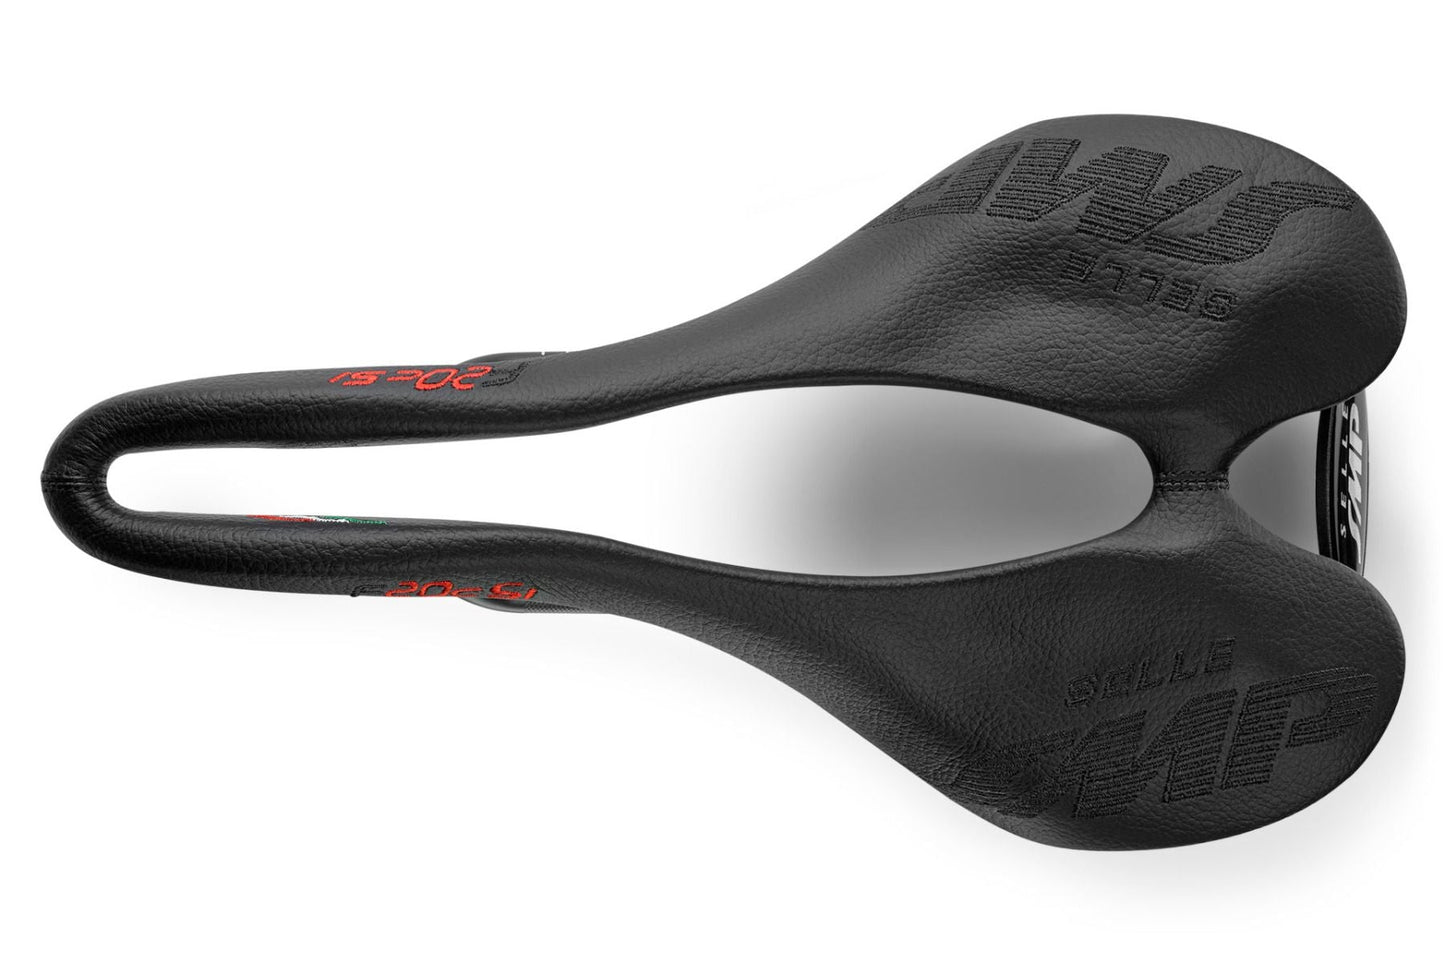 Selle SMP F20C s.i. Bicycle Saddle with Steel Rails (Black)